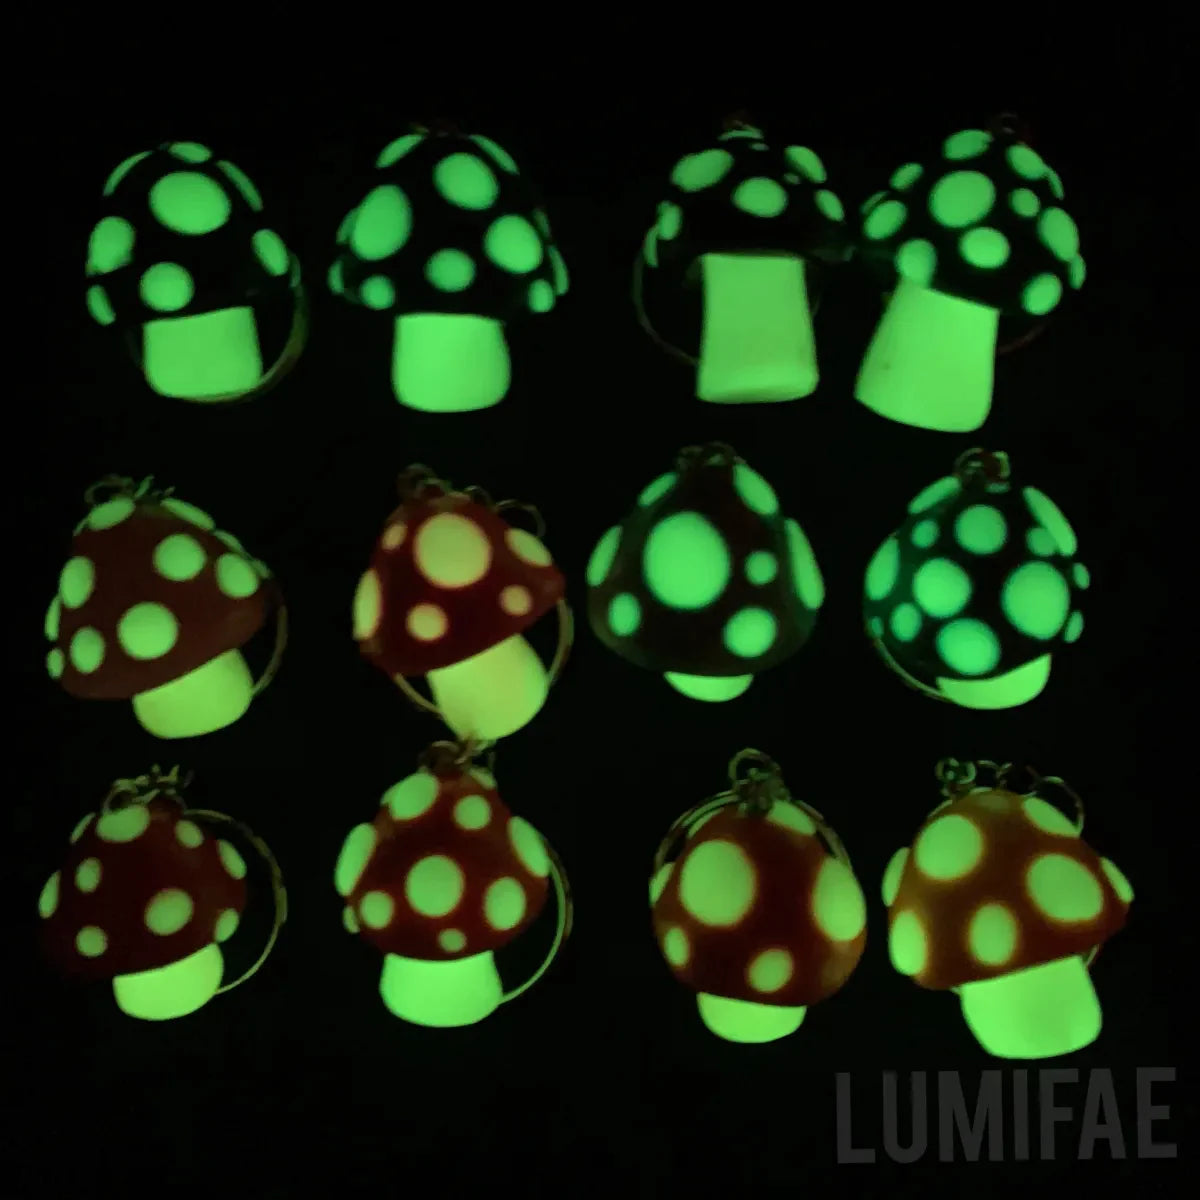 Bright Pink and Glow-in-the-Dark Spotted Mushroom Keychains, cute, cartoon, stylized, Blacklight, UV reactive, glow